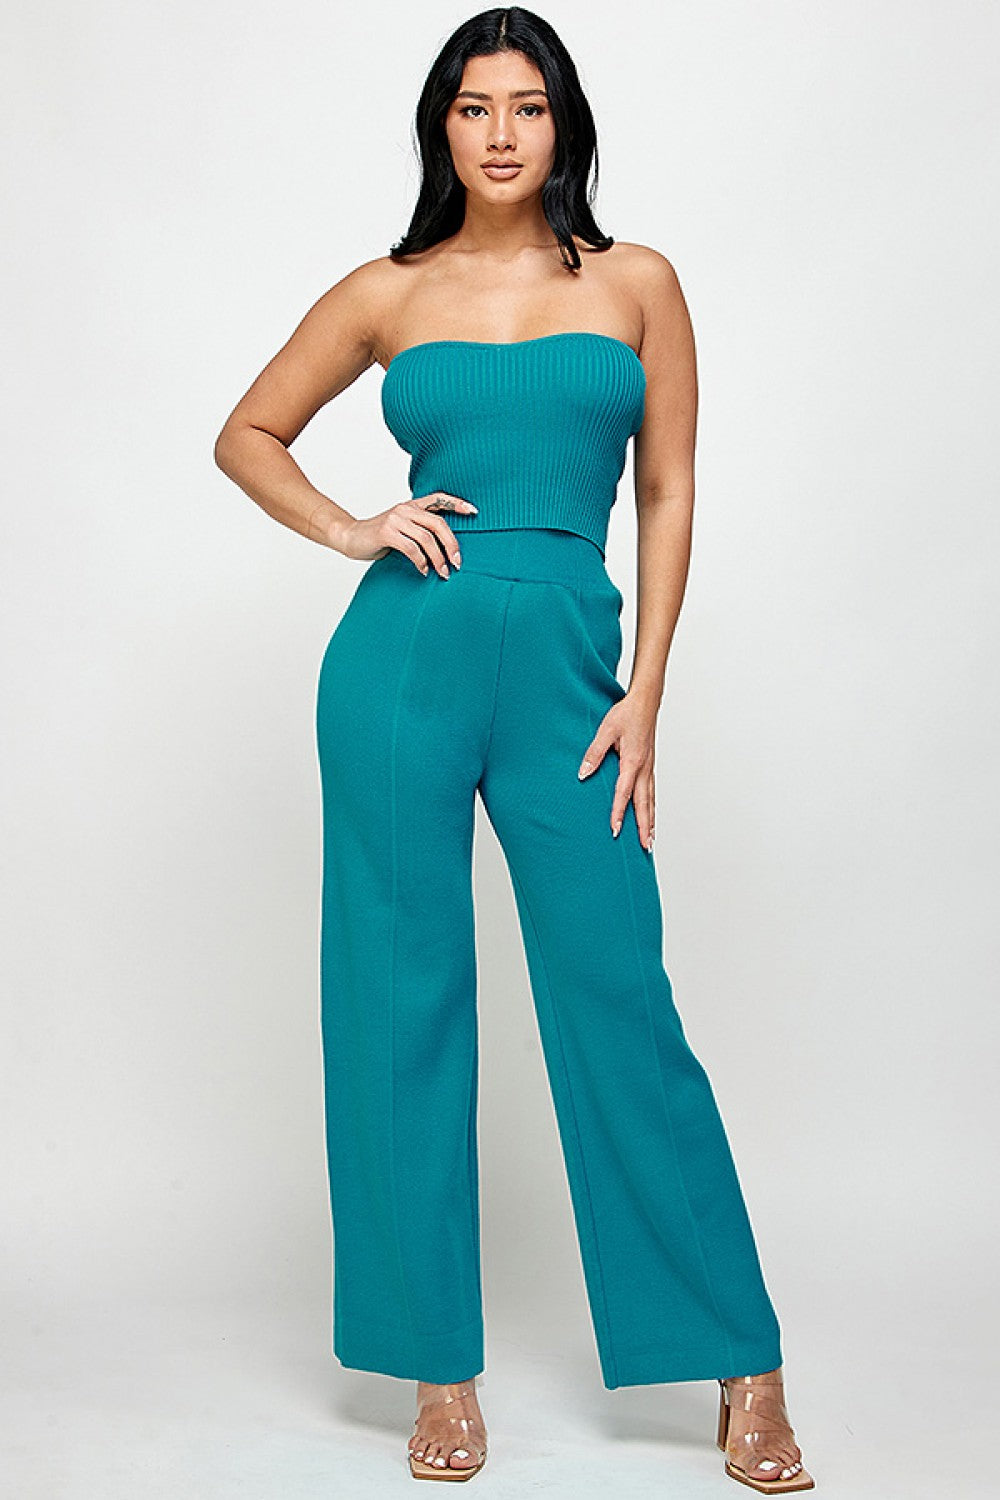 Turquoise Strapless Top and Wide Leg Pants